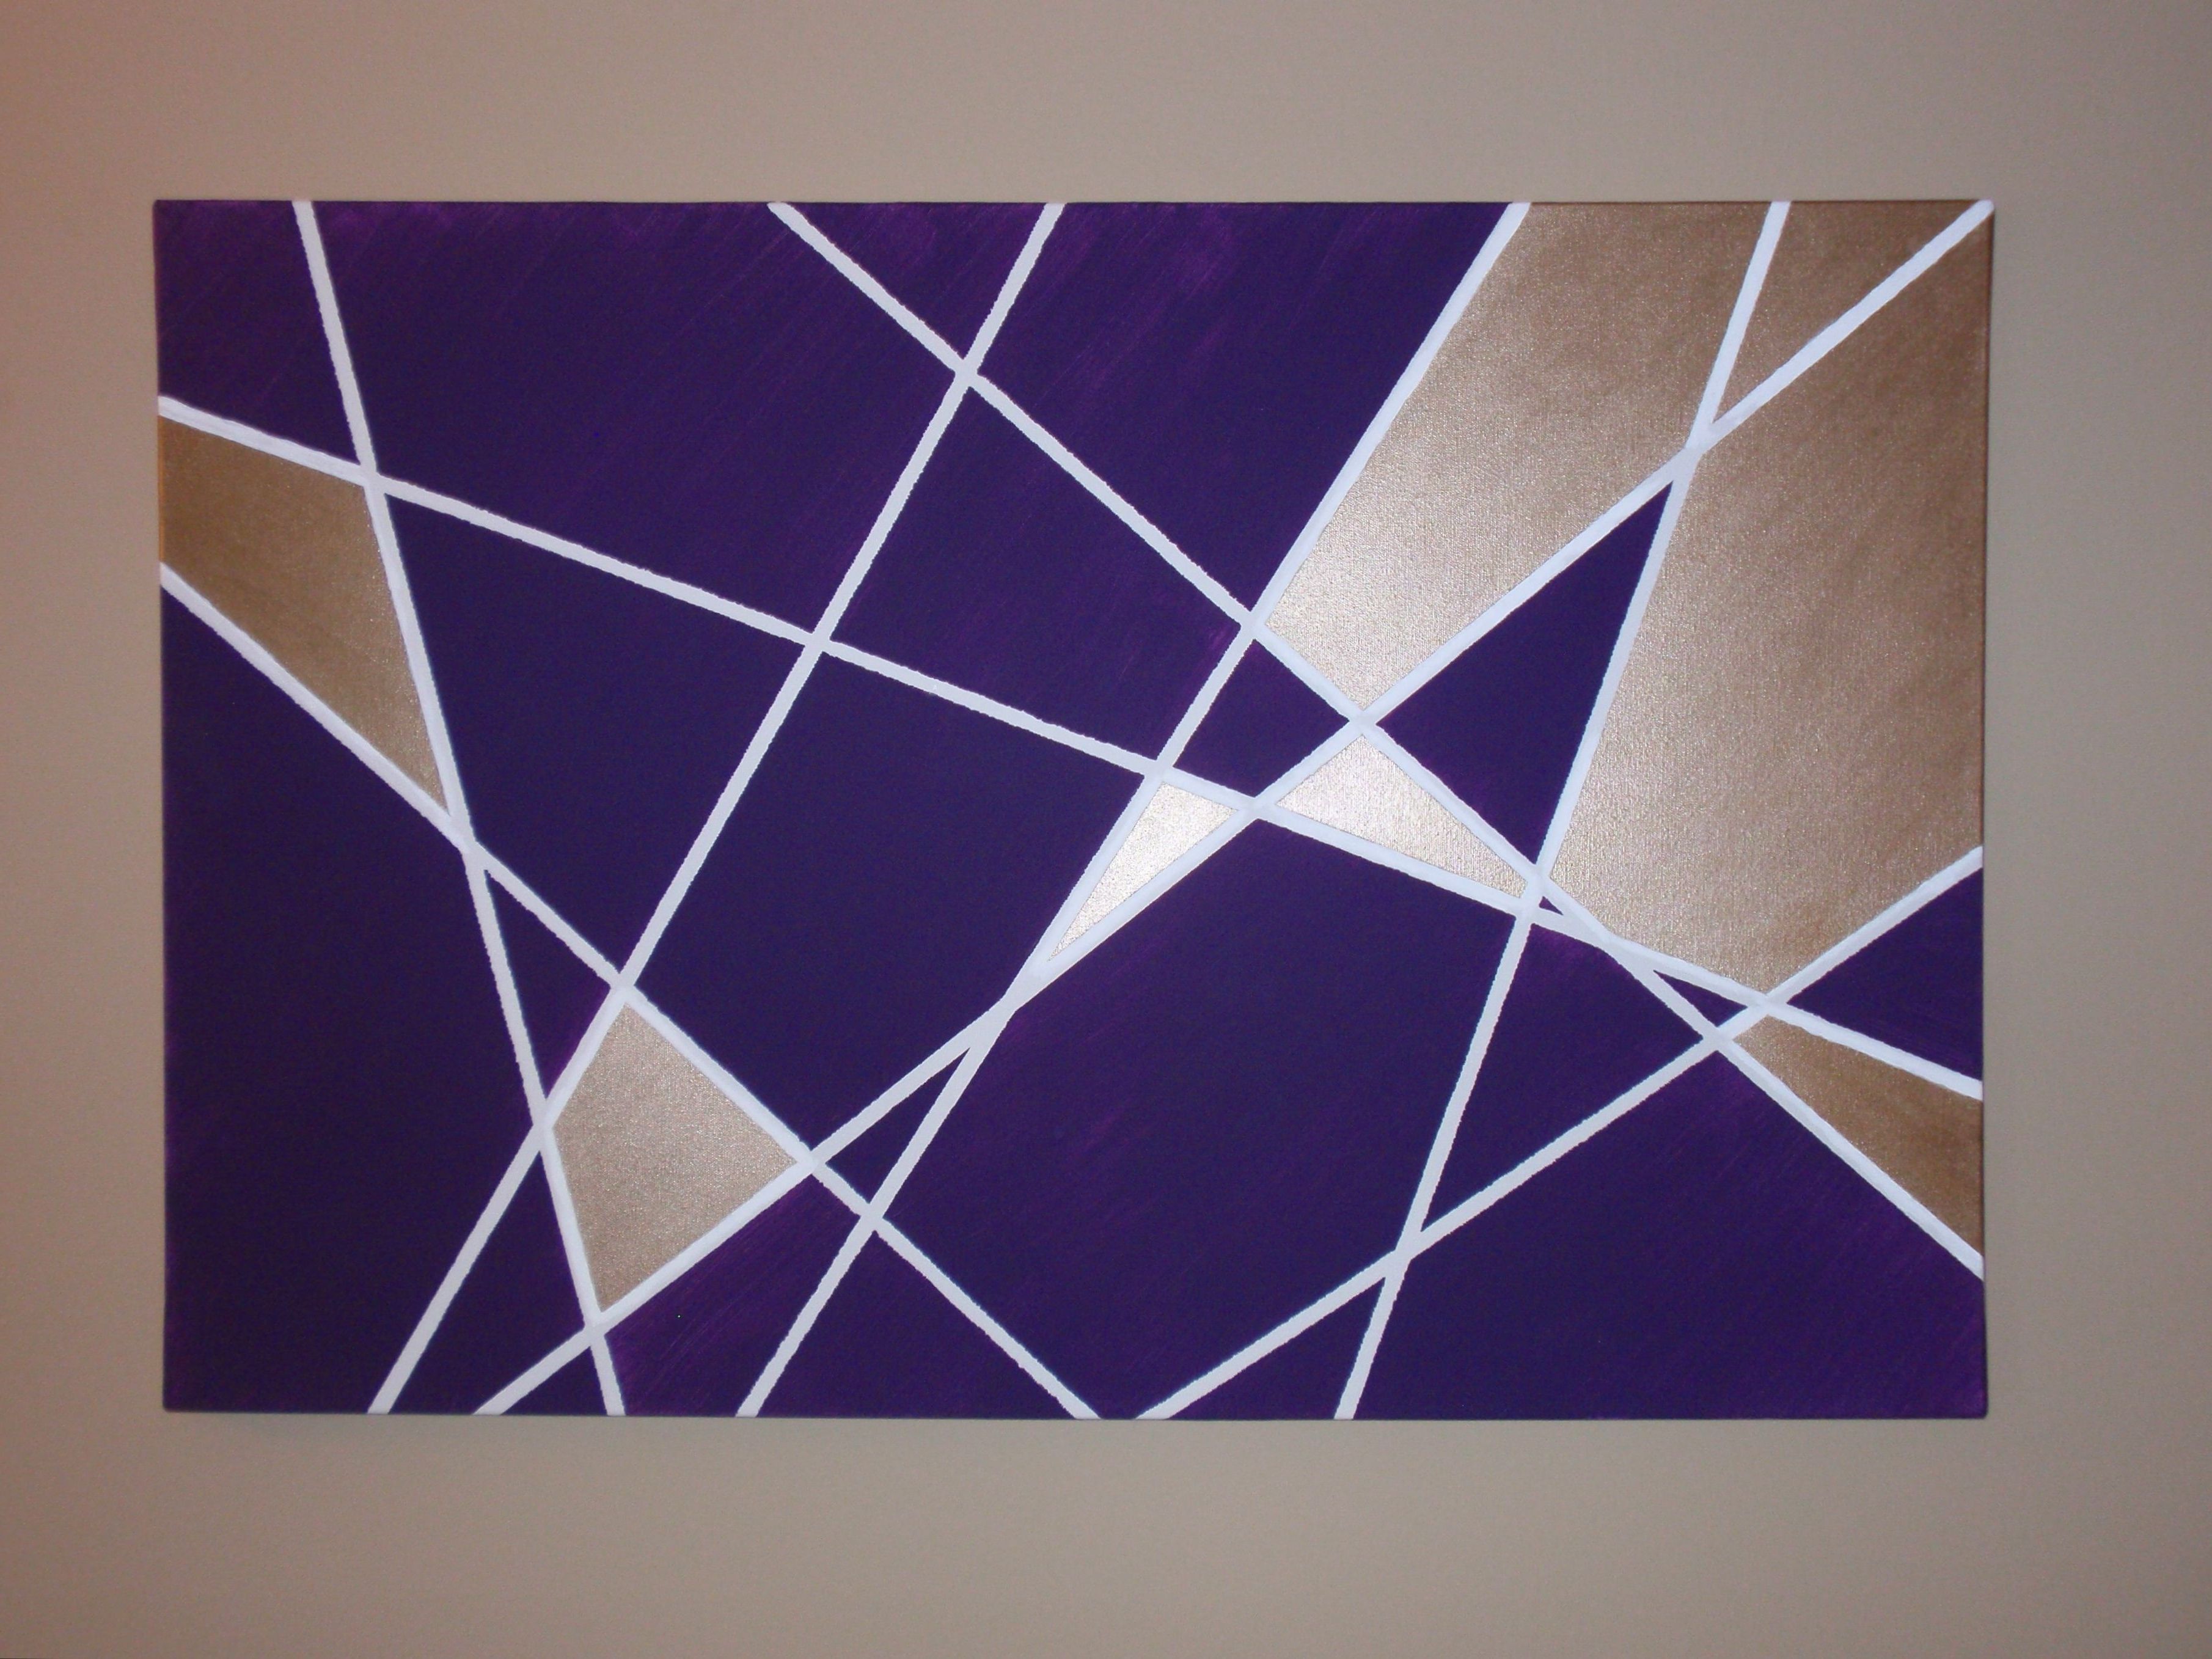 Rectangular Wall Accents Regarding Most Recently Released Wall Art Ideas Design : Purple Rectangle Geometric Wall Art Home (View 15 of 15)